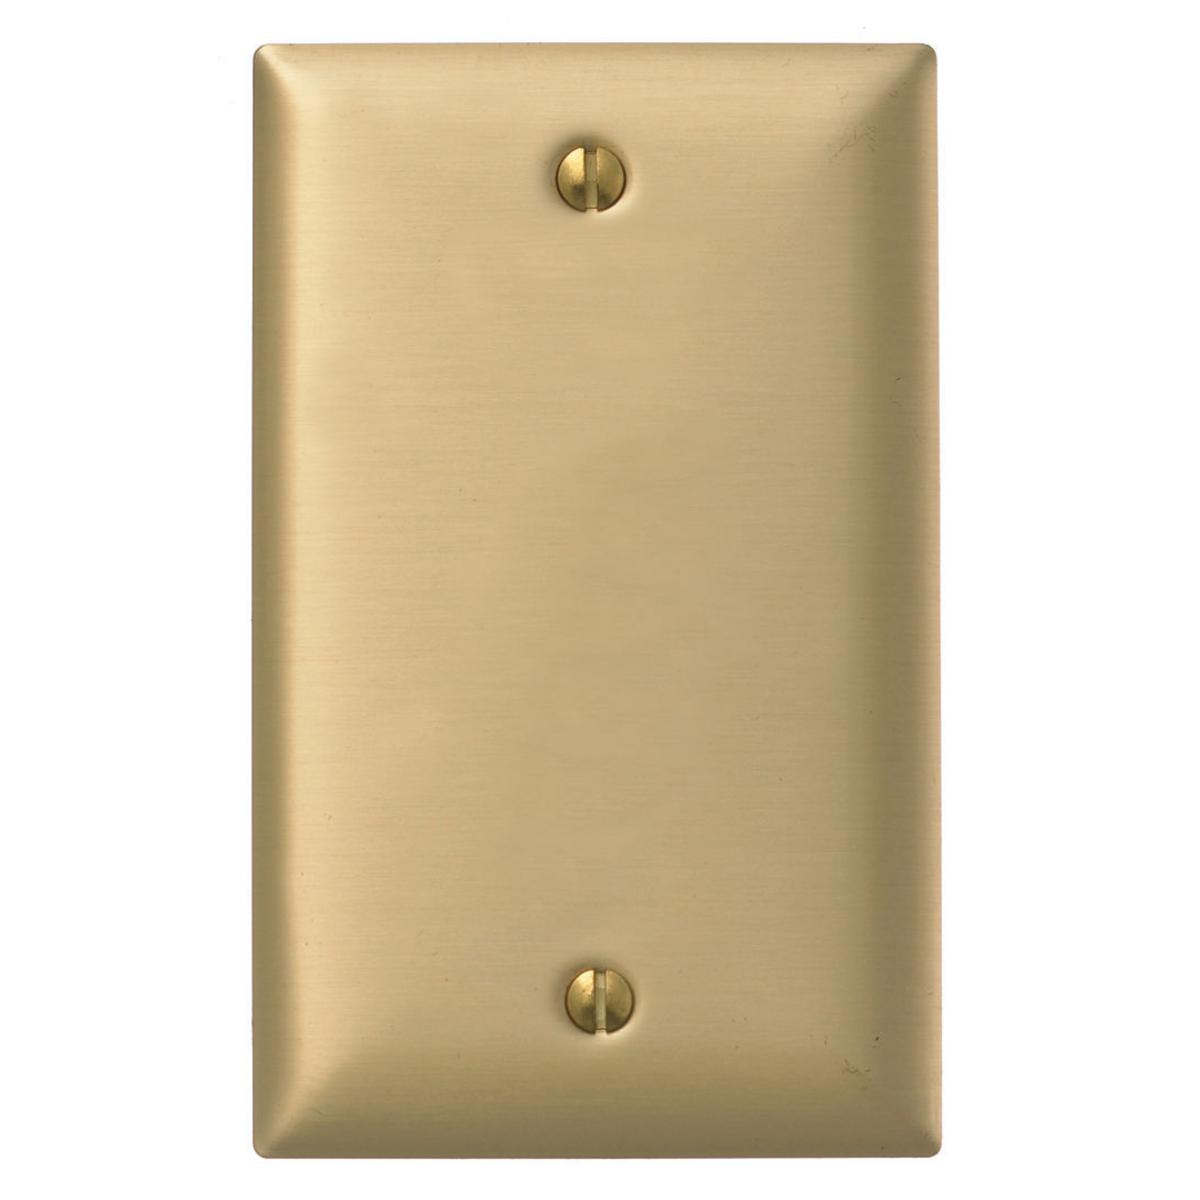 Hubbell SB13 Wallplates and Boxes, Metallic Plates, 1- Gang, Blank, Standard Size, Brass  ; Non-magnetic and corrosion resistant ; Finish is lacquer coated to inhibit oxidation ; Protective plastic film helps to prevent scratches and damage ; Protective film helps to 